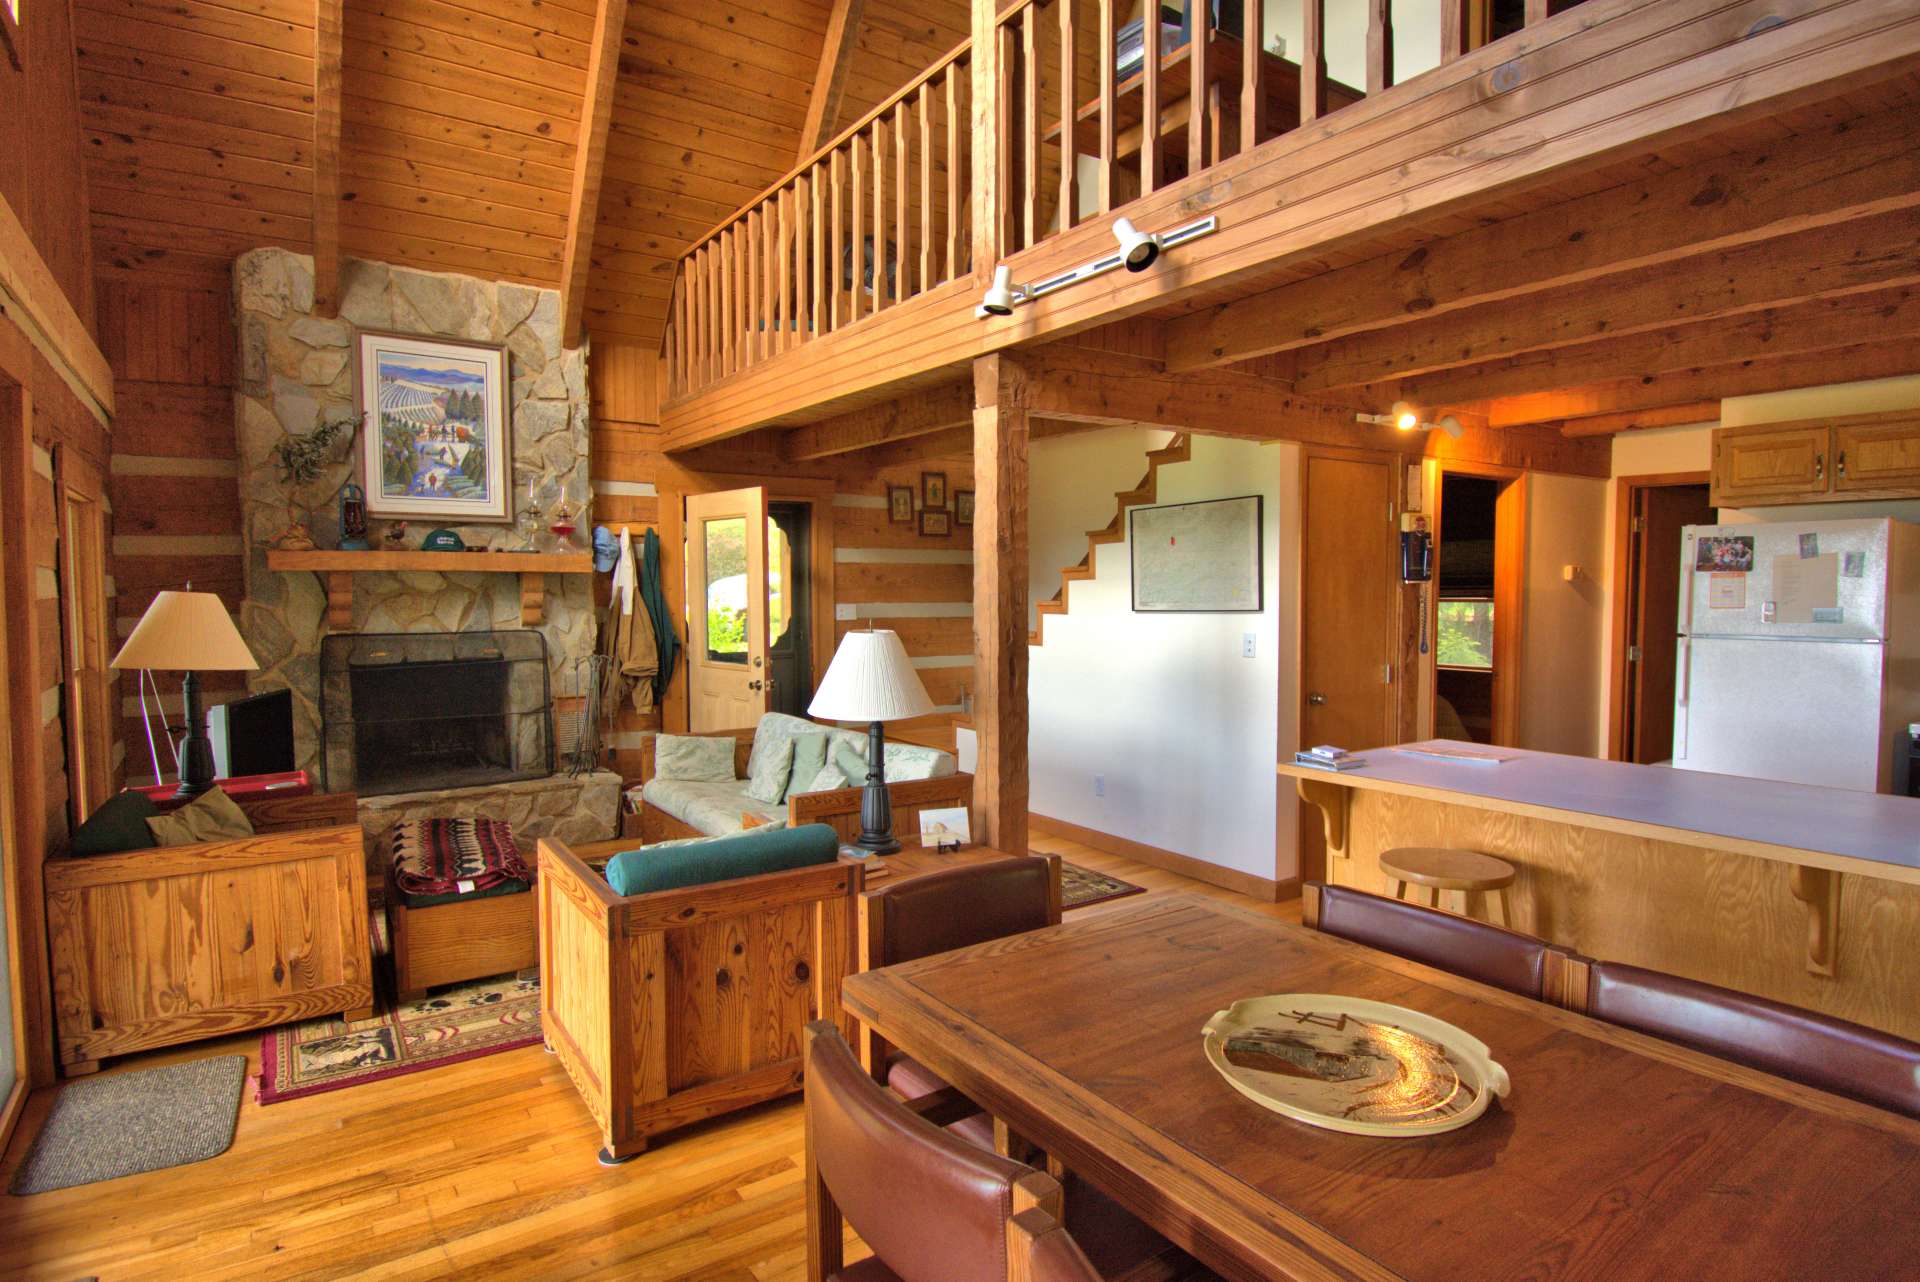 A stone wood-burning fireplace is the focal point of the living area and enhances the cabin feel.